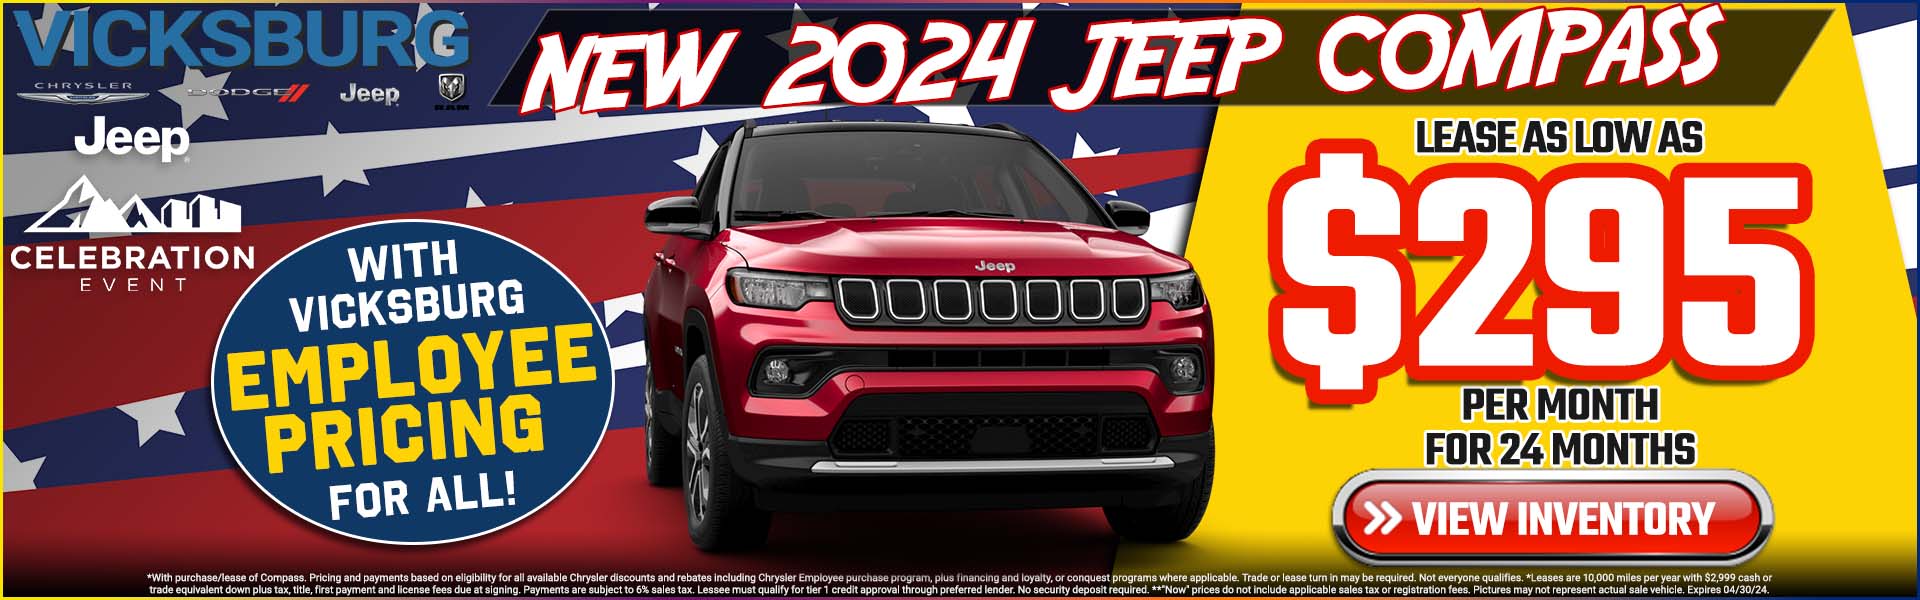  2024 Jeep Compass $295 per month for 24 months